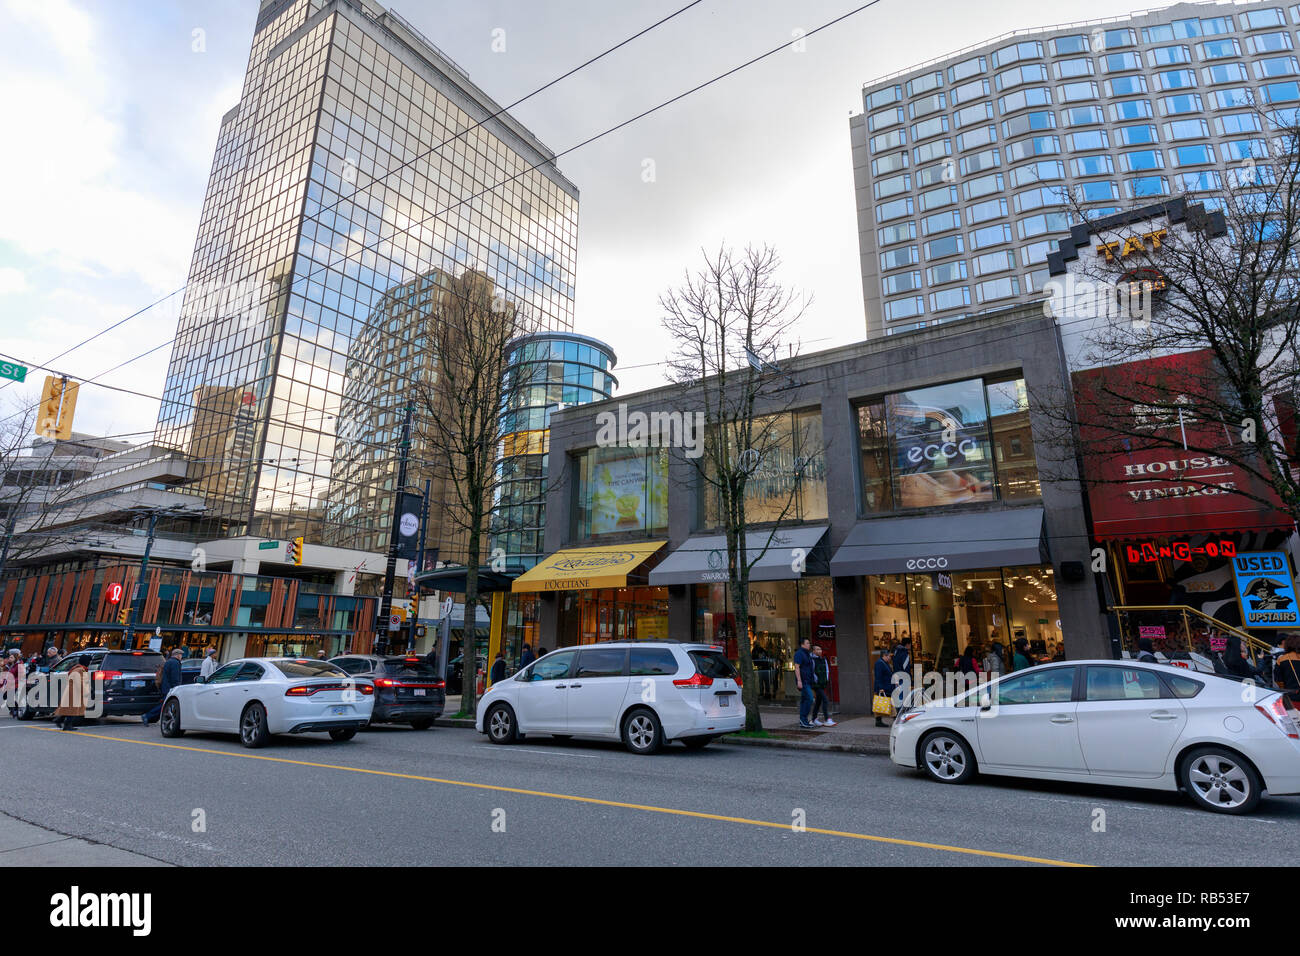 Vancouver, Canada - Feb 1, 2019 : Robson Street of Downtown